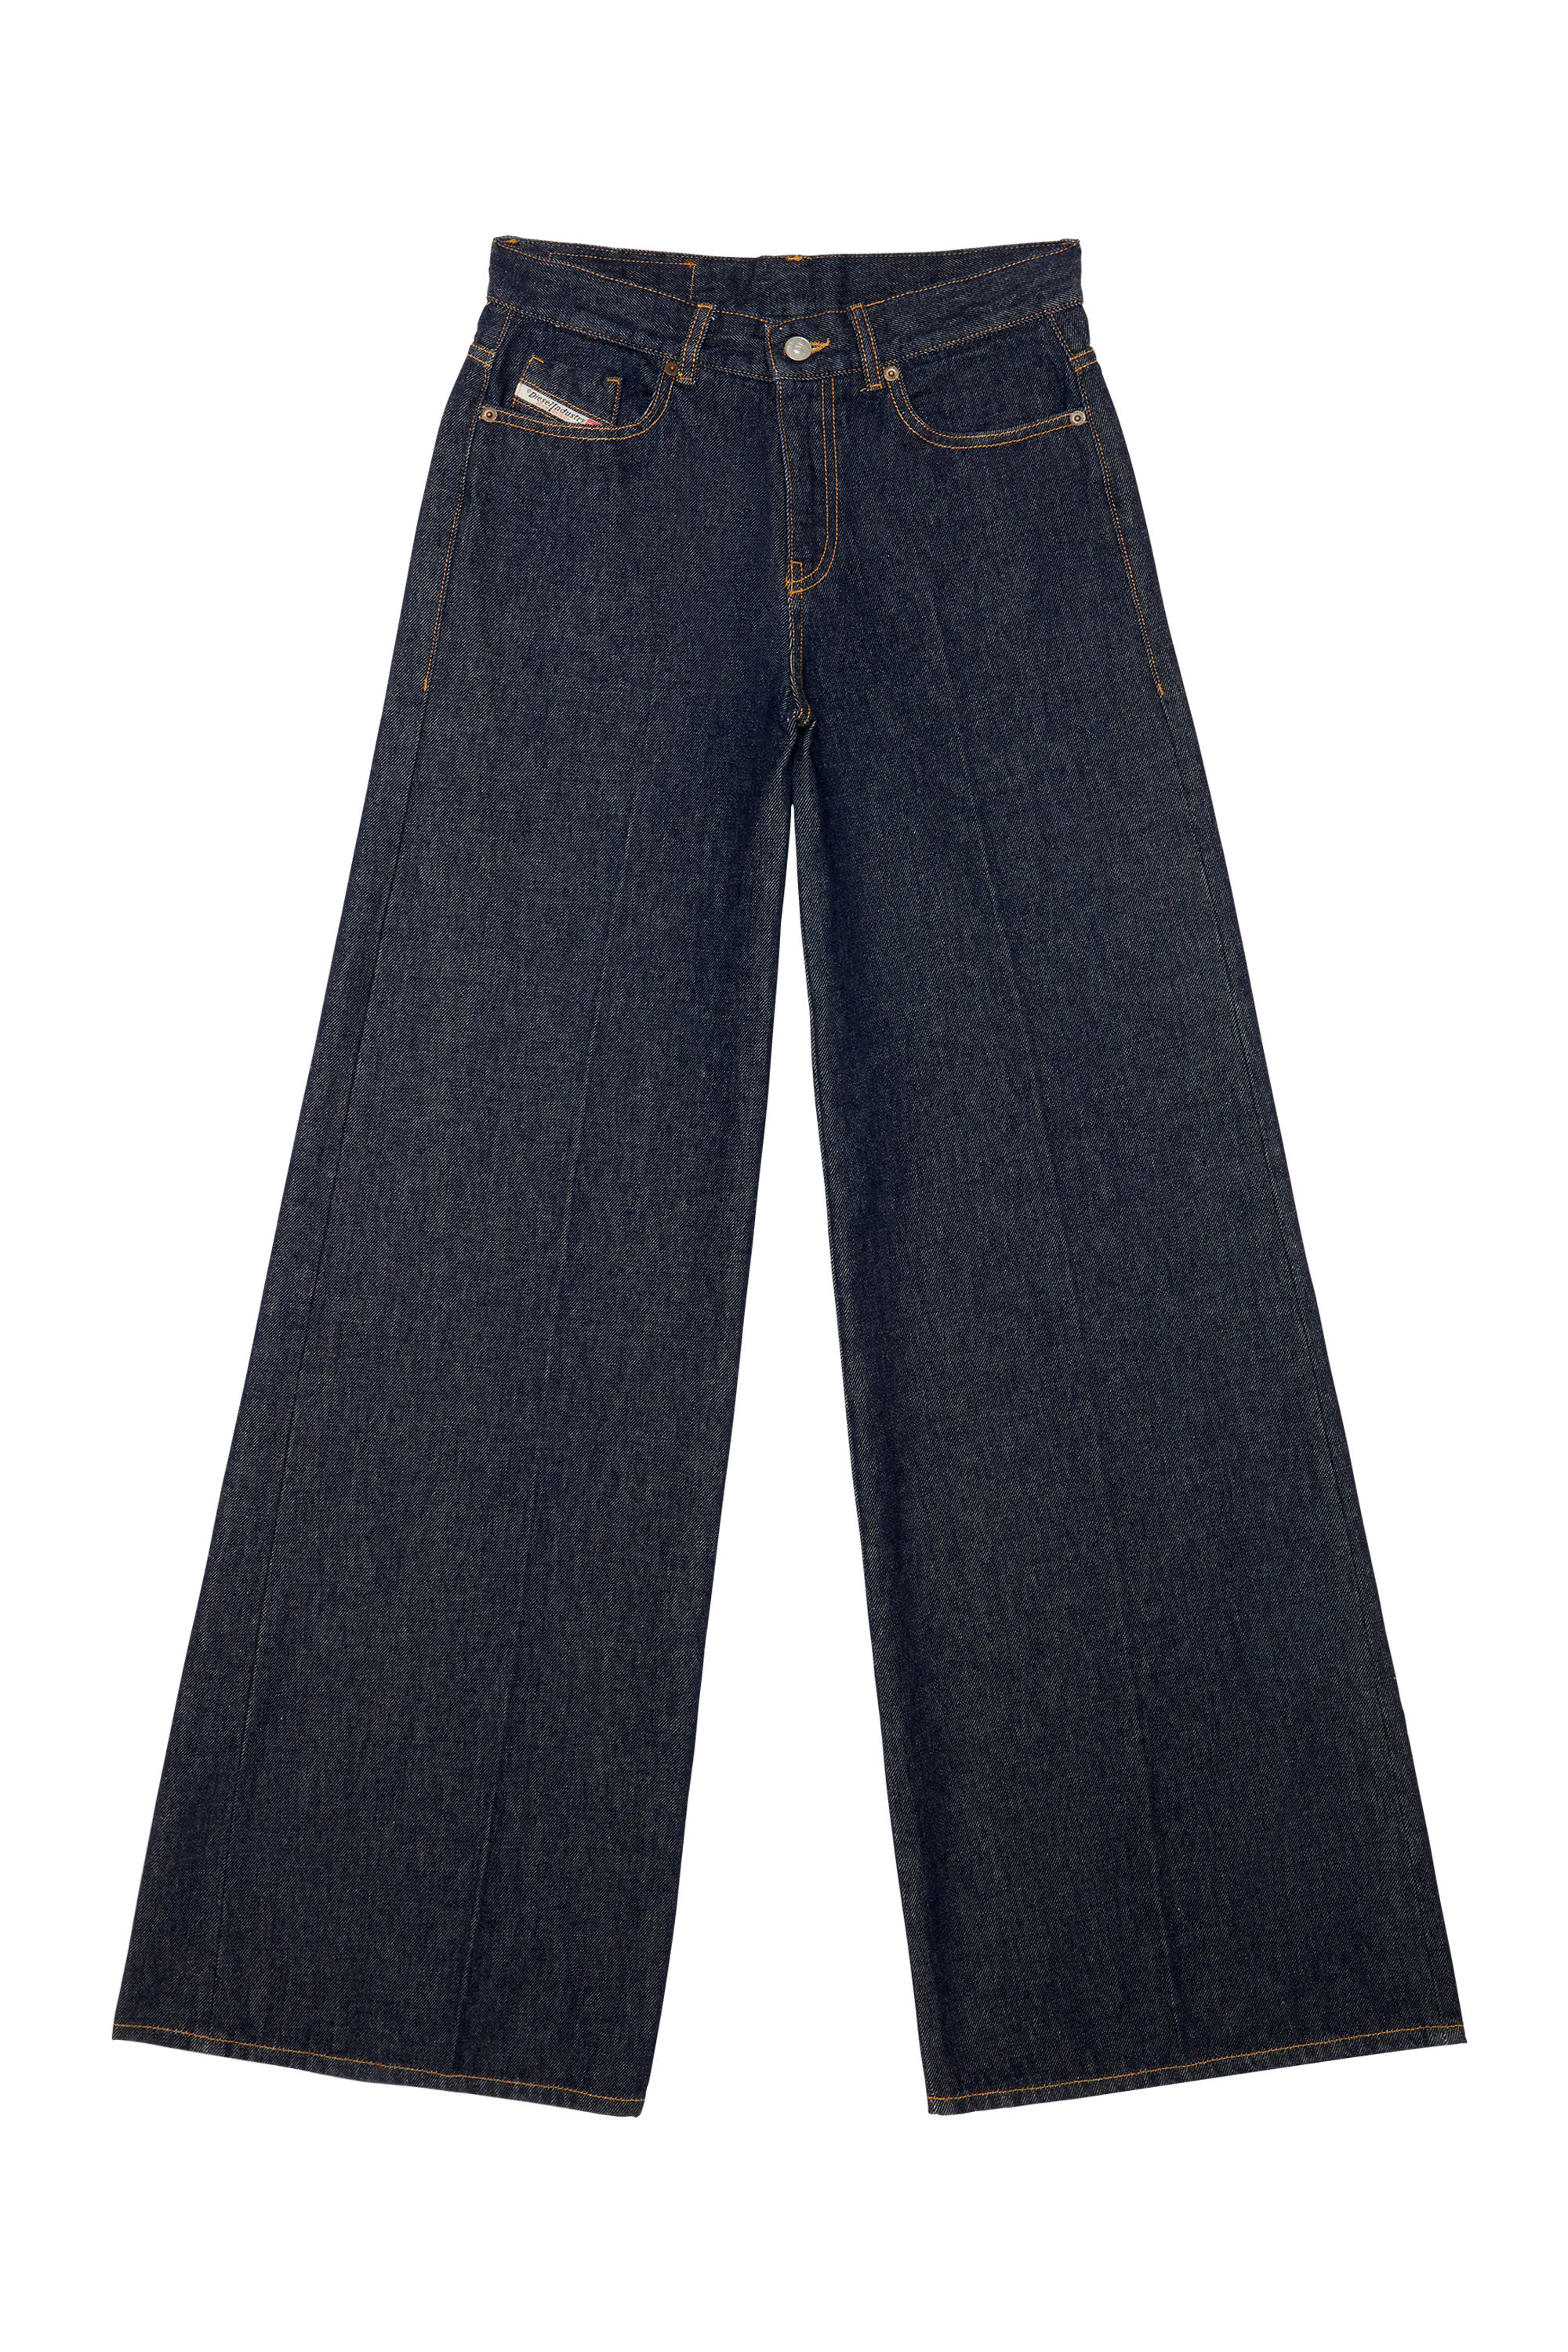 1978 Z9C02 Bootcut and Flare Jeans, Dark Blue - Jeans